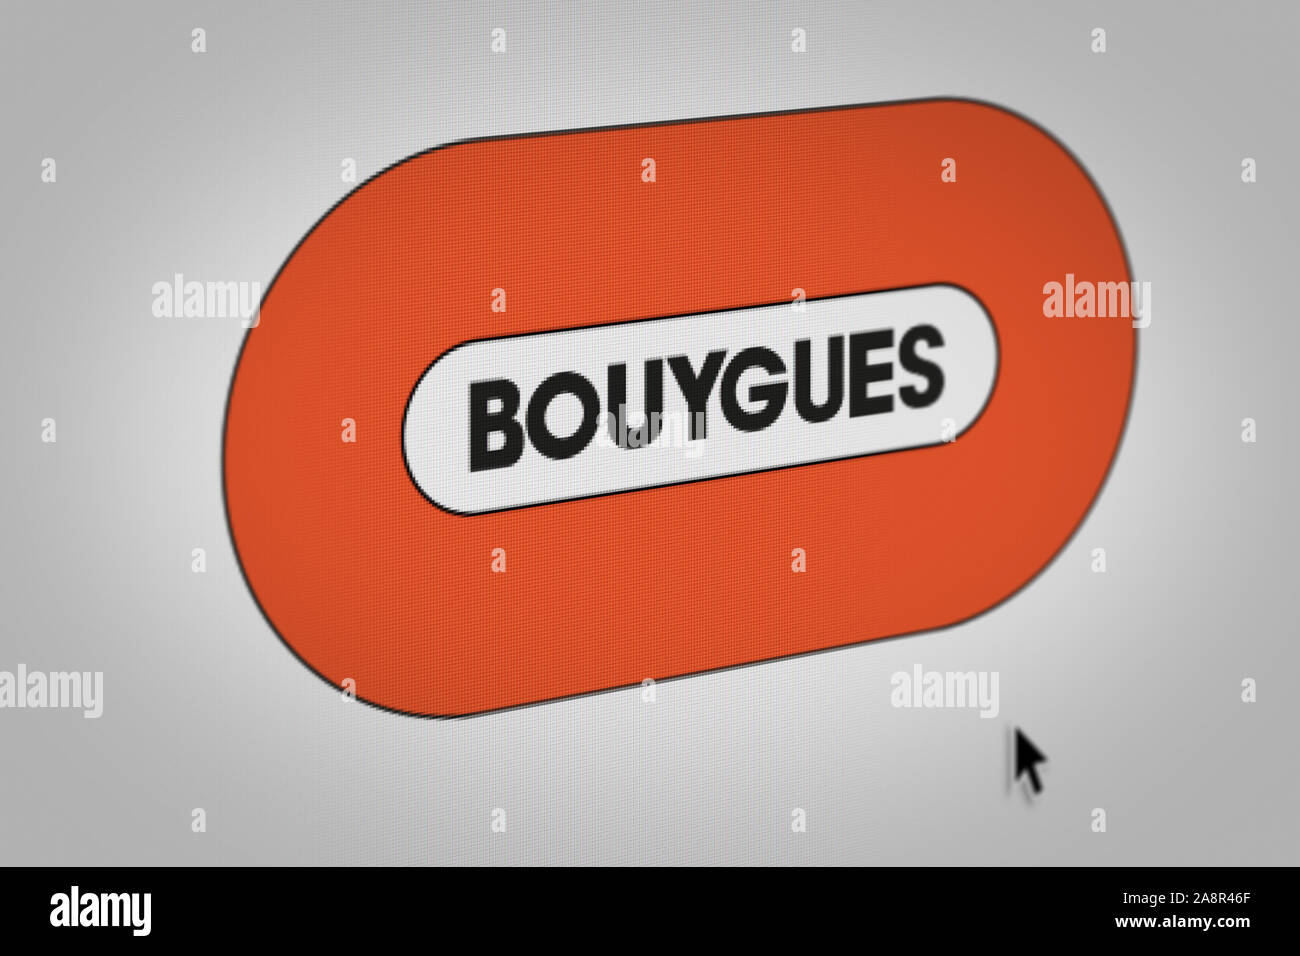 Logo of the public company Bouygues displayed on a computer screen in close-up. Credit: PIXDUCE Stock Photo